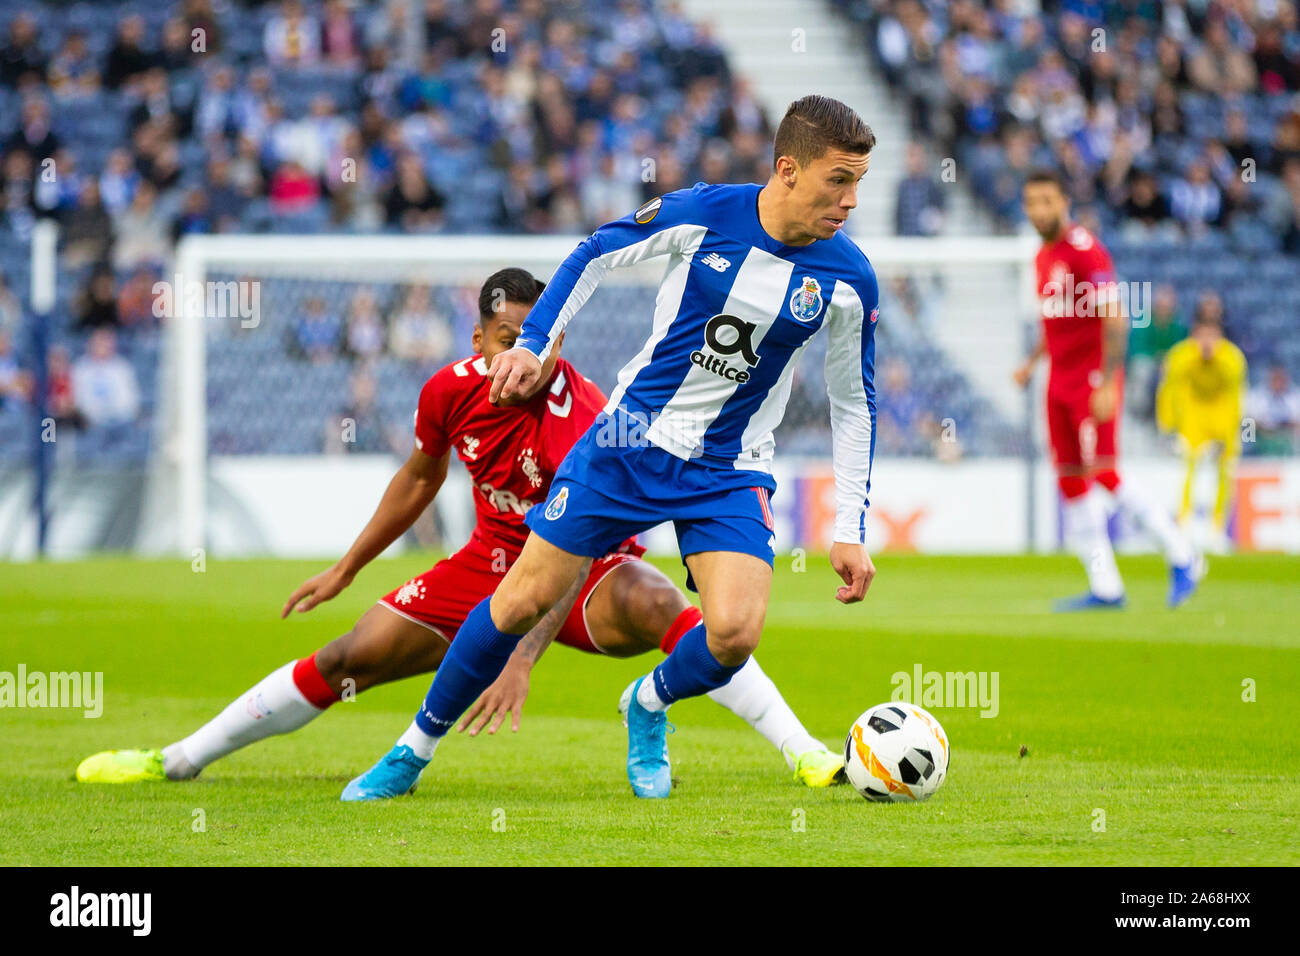 FC Porto's player, Mateus Uribe seen in action during the UEFA Europa League match at Dragon Stadium. (Final score: FC Porto 1:1 Rangers) Stock Photo